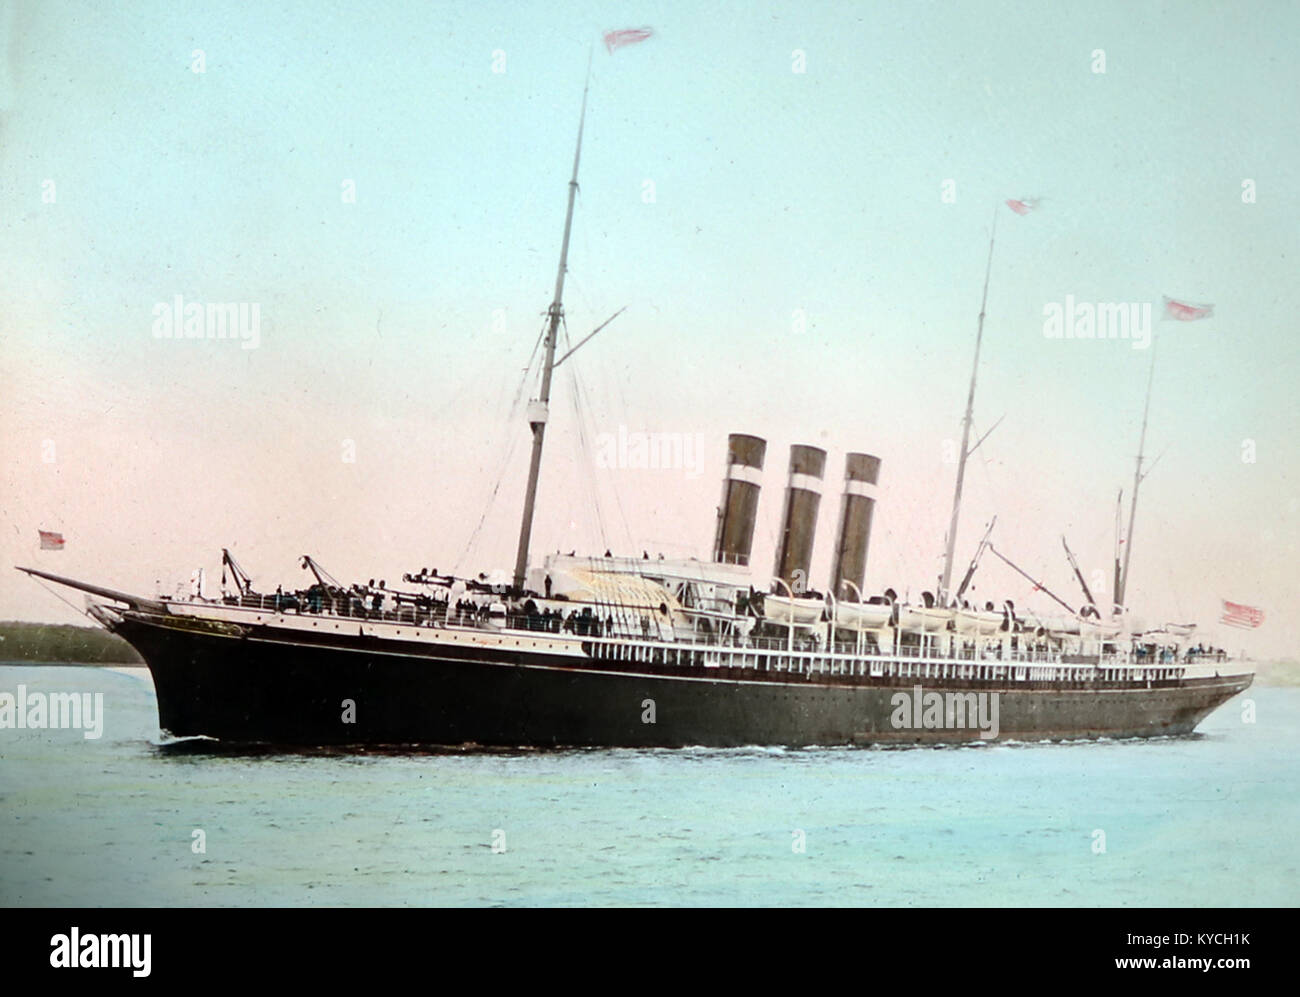 Steamship Paris, French ocean liner, early 1900s, hand coloured photo Stock Photo